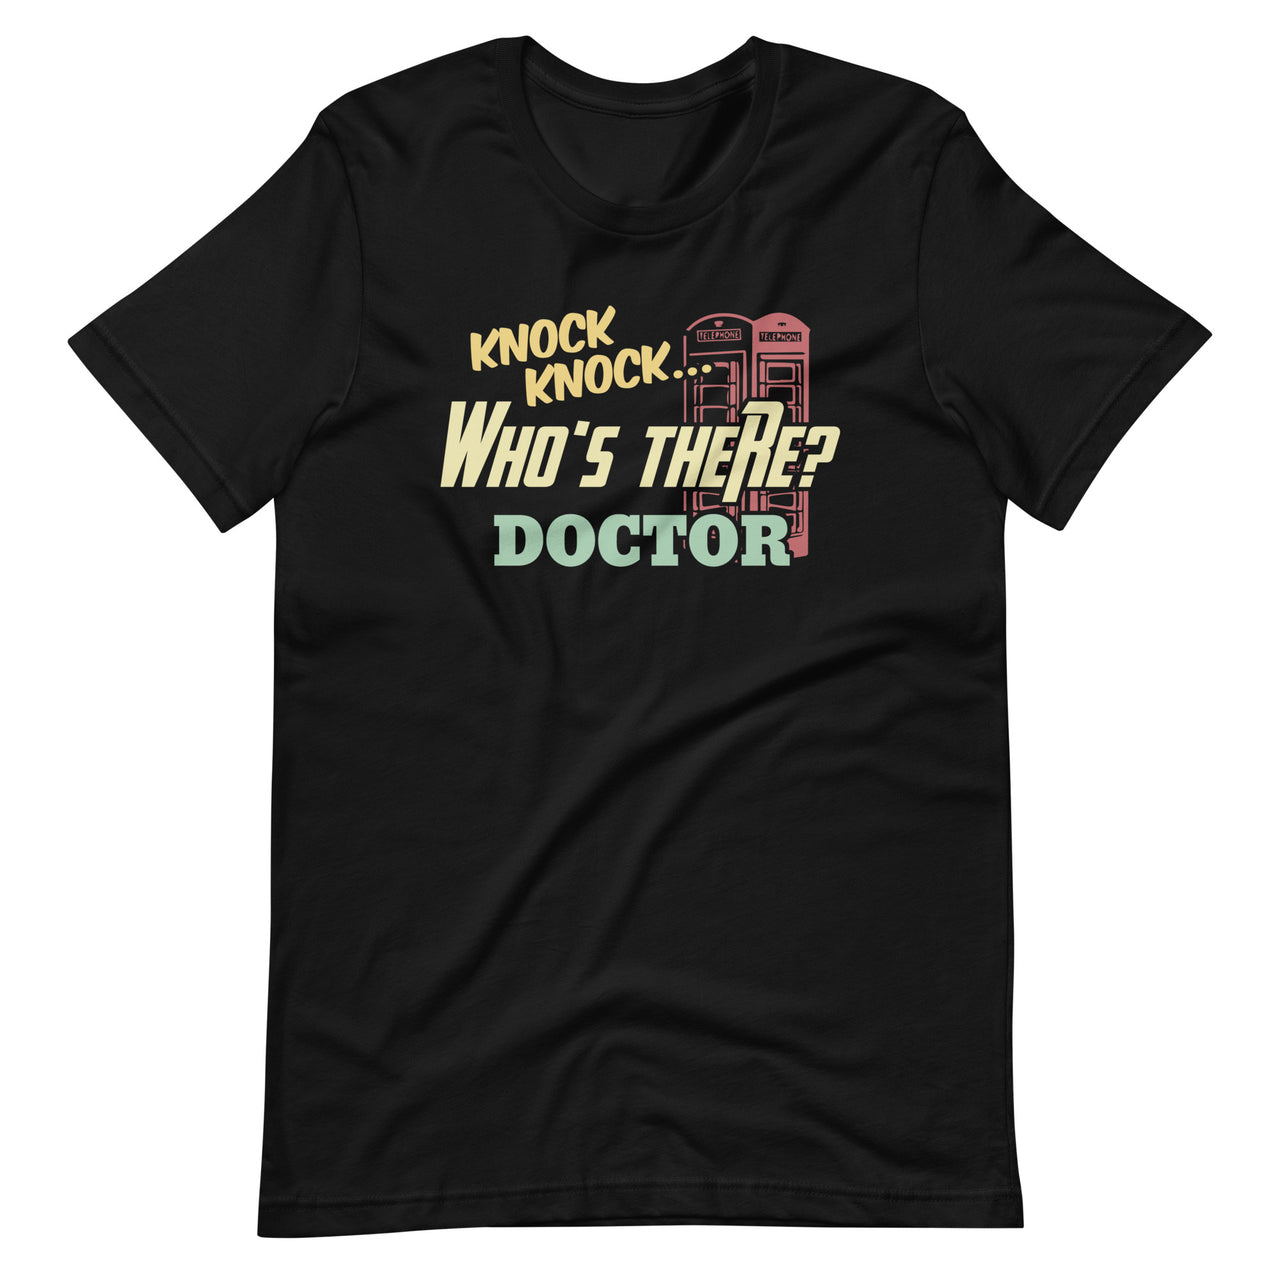 Knock Knock Who's There Doctor - Funny Doctors Joke Unisex T-shirt